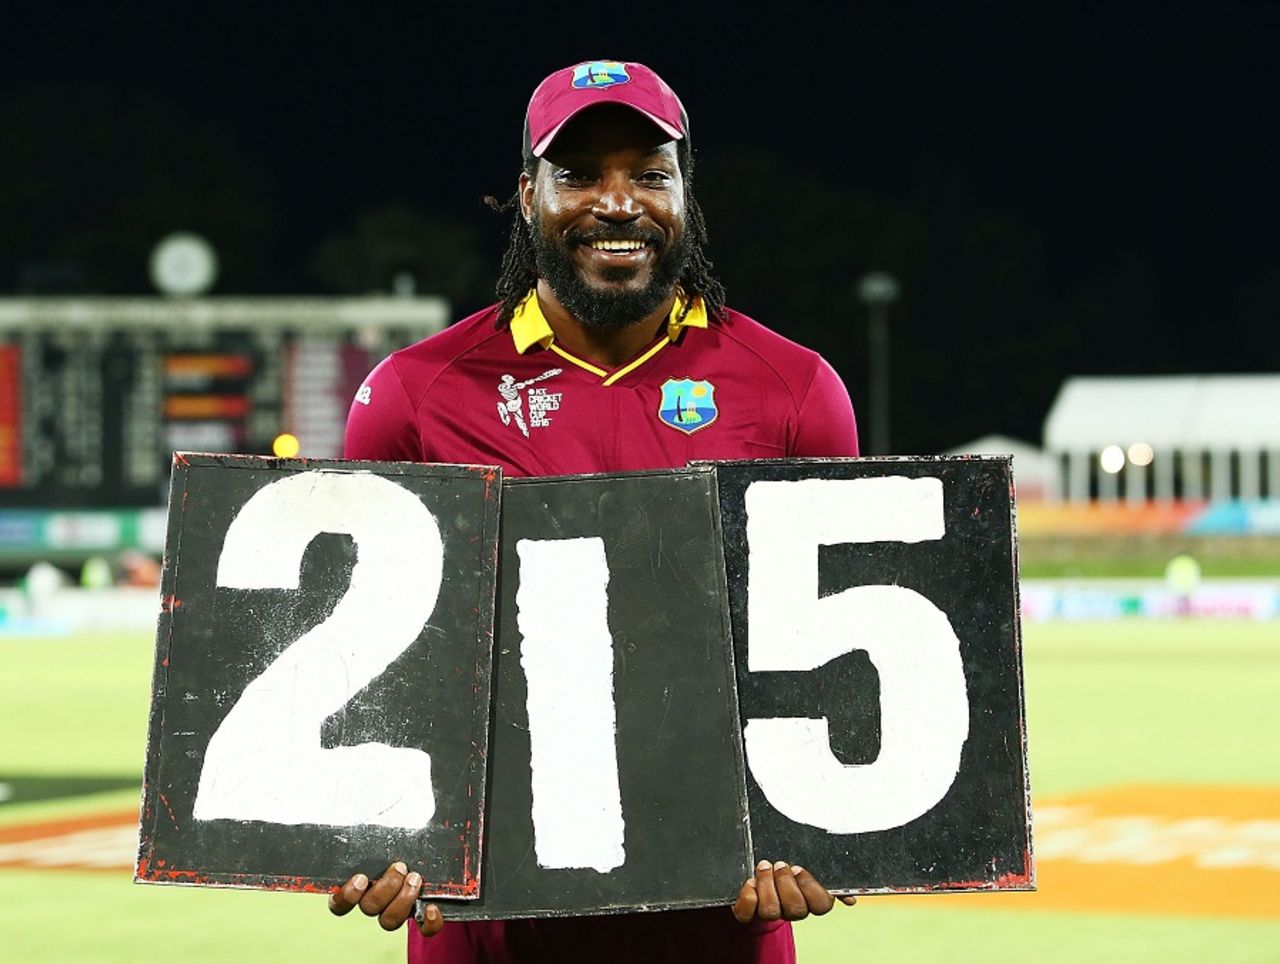 It's all mine: Chris Gayle holds the scoring plates that shout out his record, West Indies v Zimbabwe, World Cup 2015, Group B, Canberra, February 24, 2015